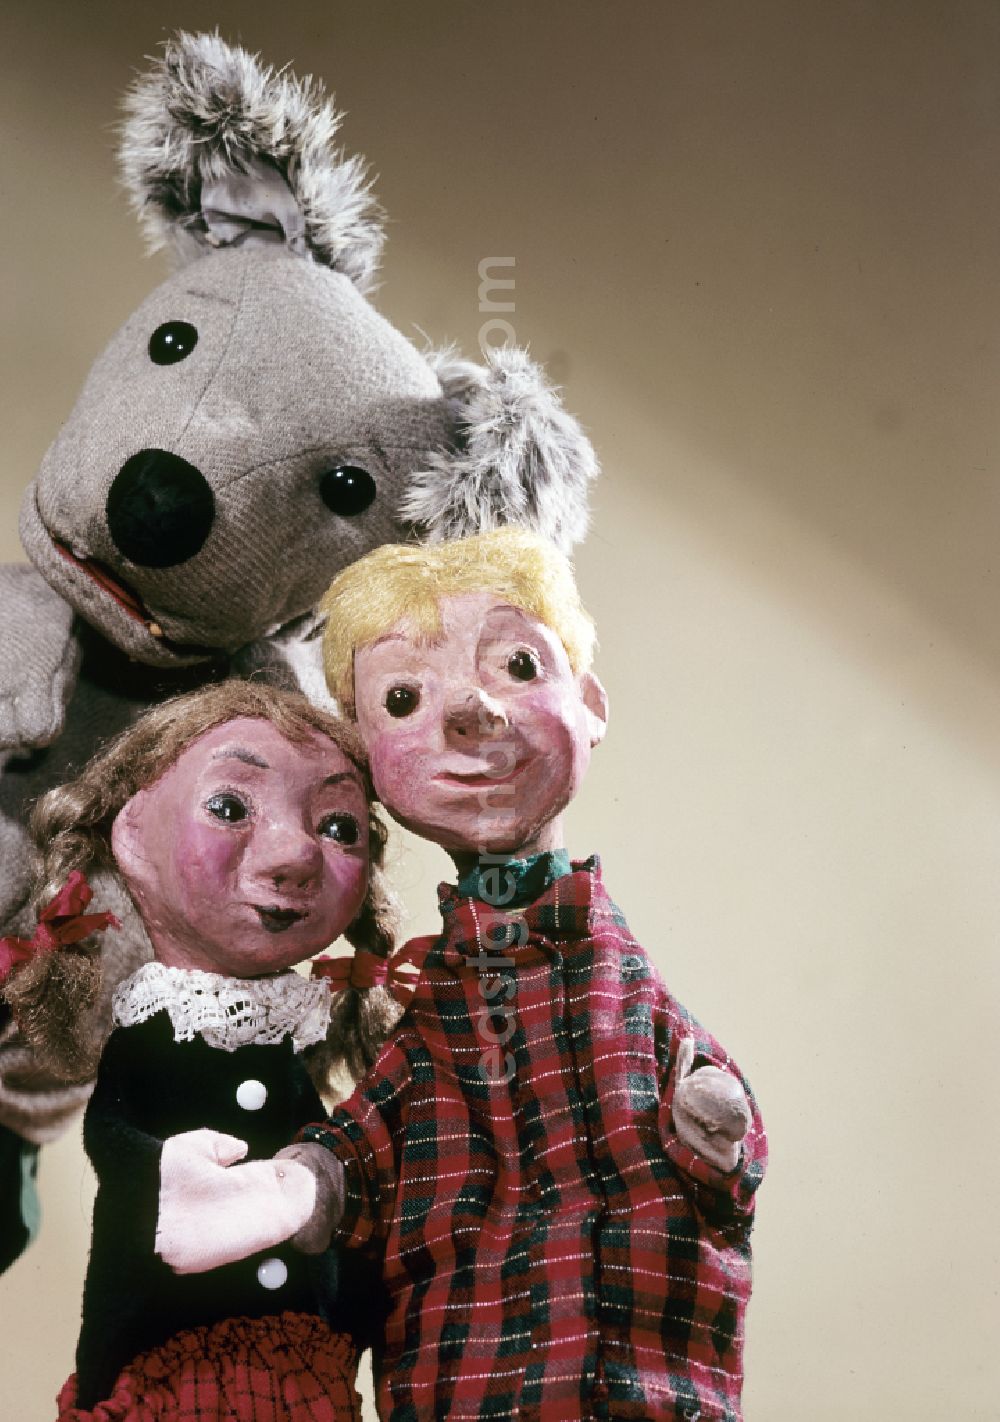 GDR image archive: Berlin - The hand puppets Kruemel (girl), Flax (boy) and Struppi (dog) in East Berlin in the territory of the former GDR, German Democratic Republic